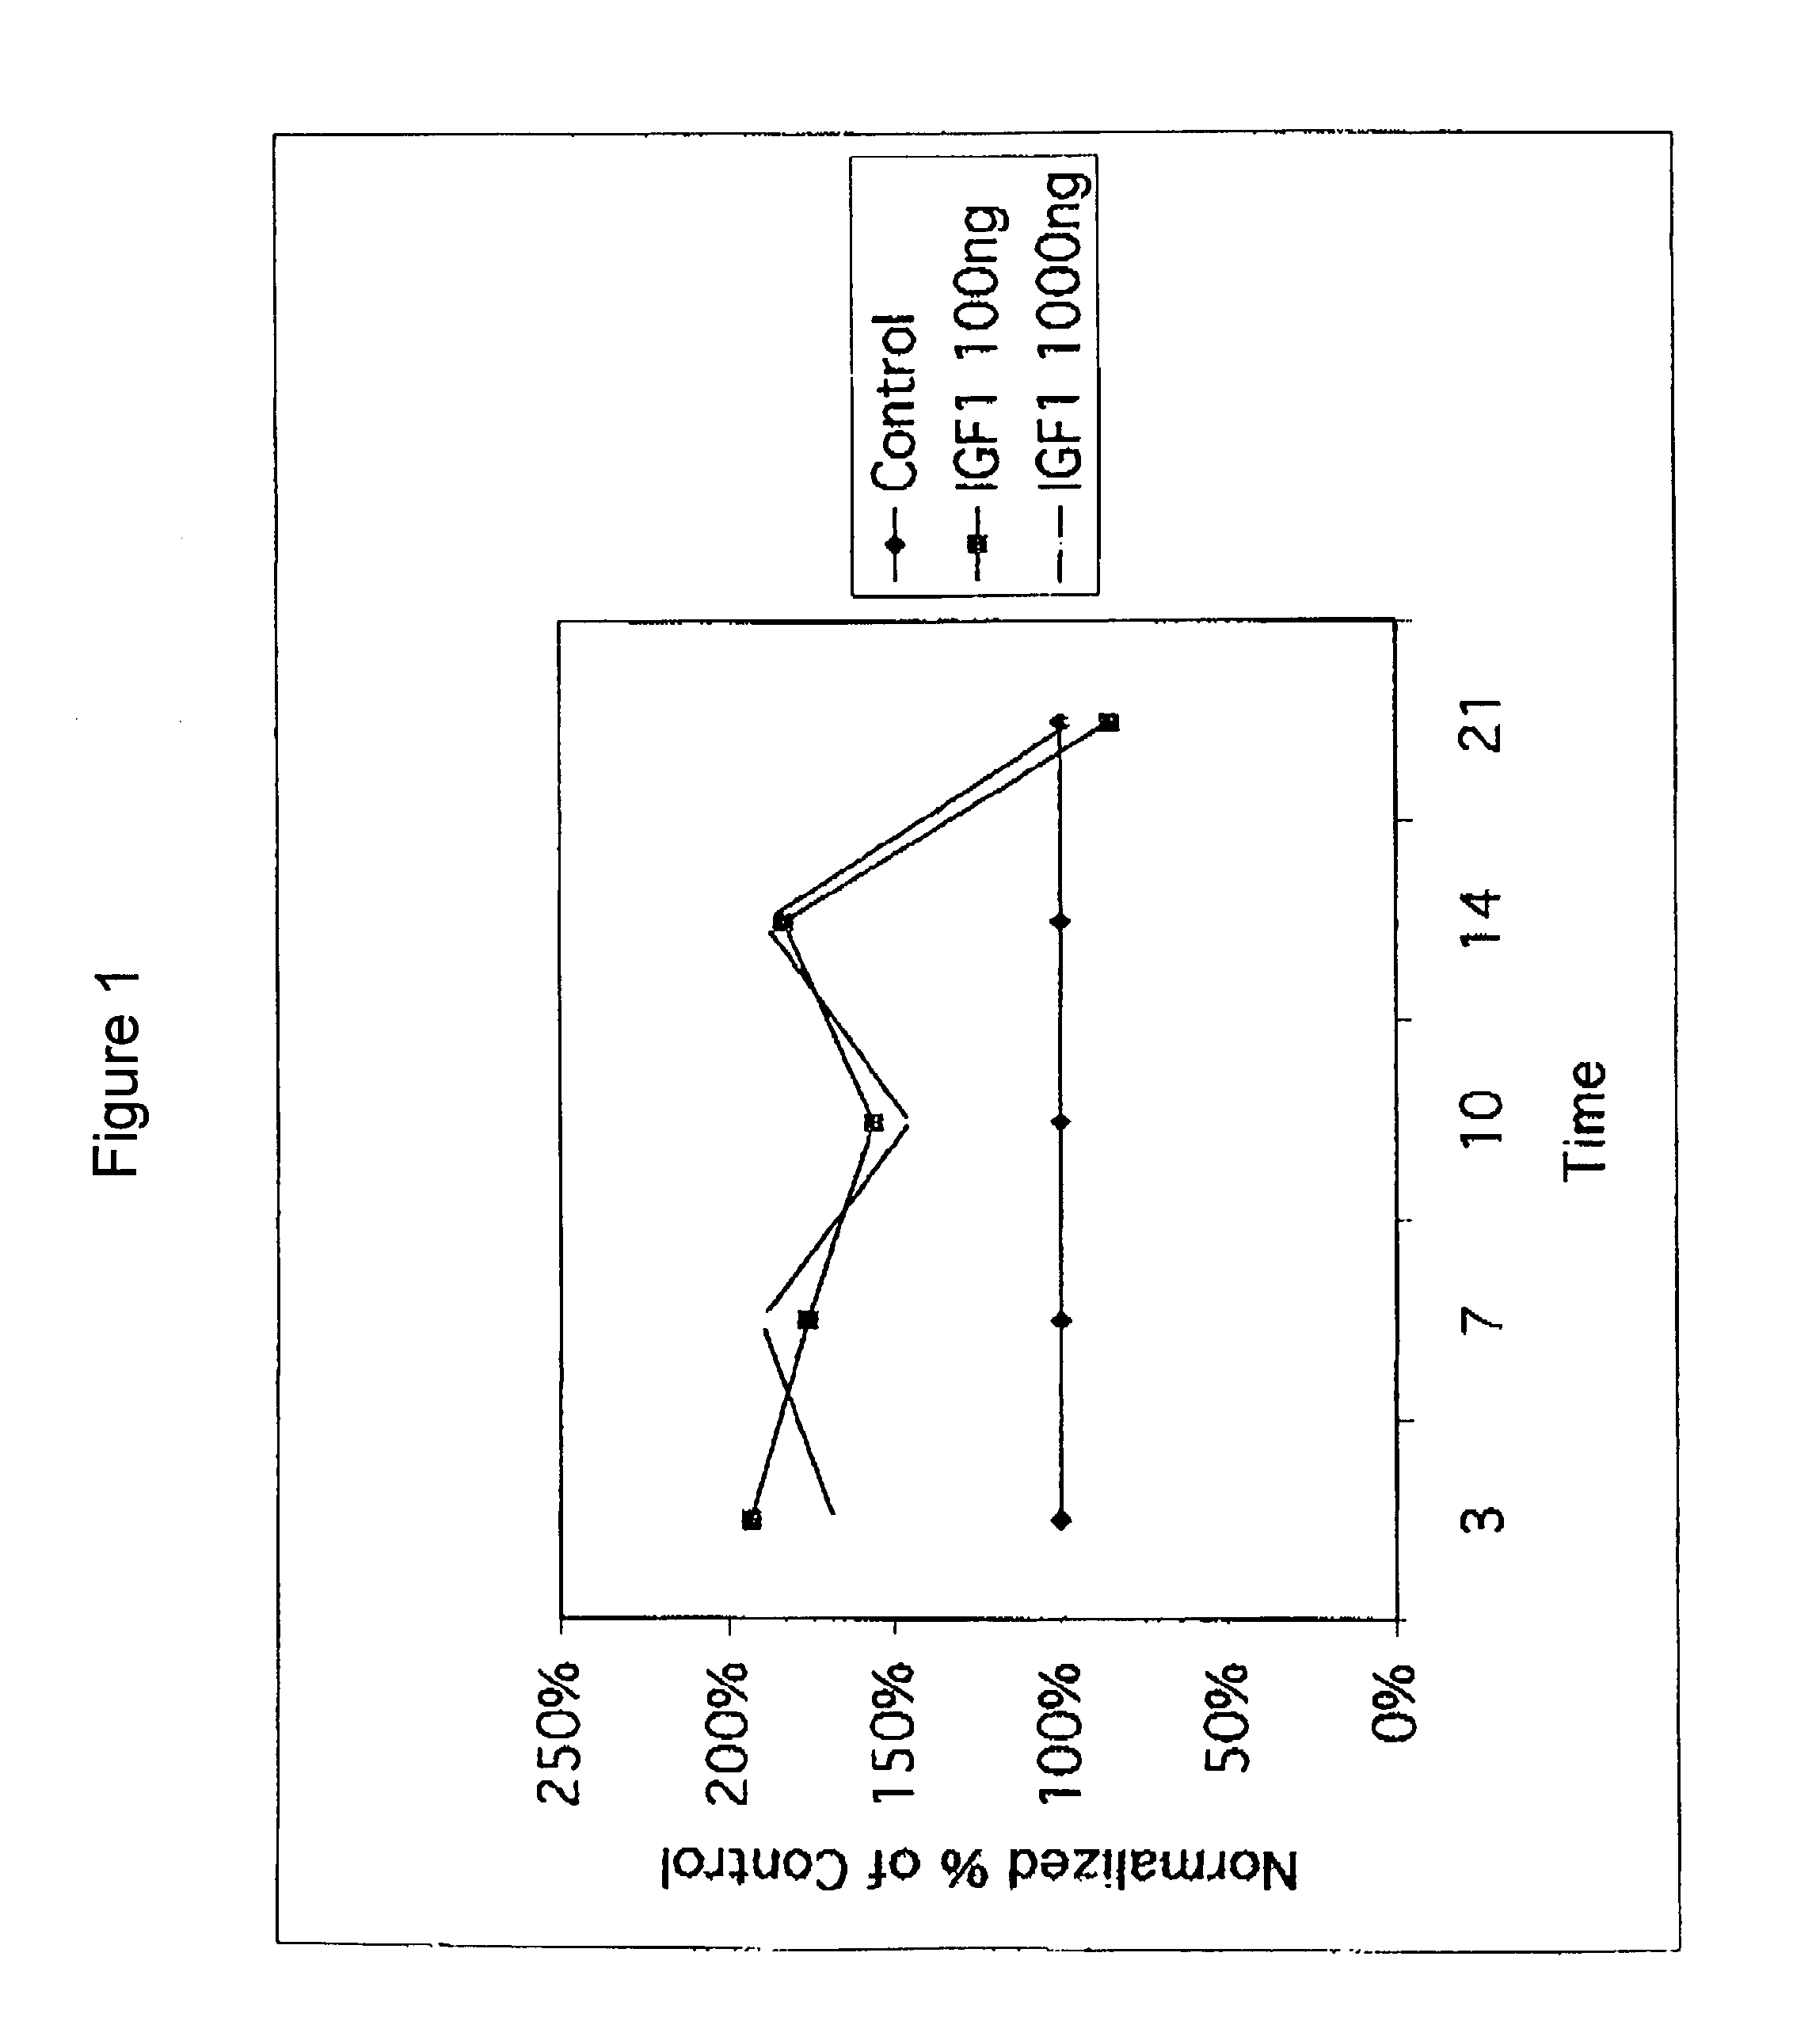 Compositions and methods for treating articular cartilage disorders